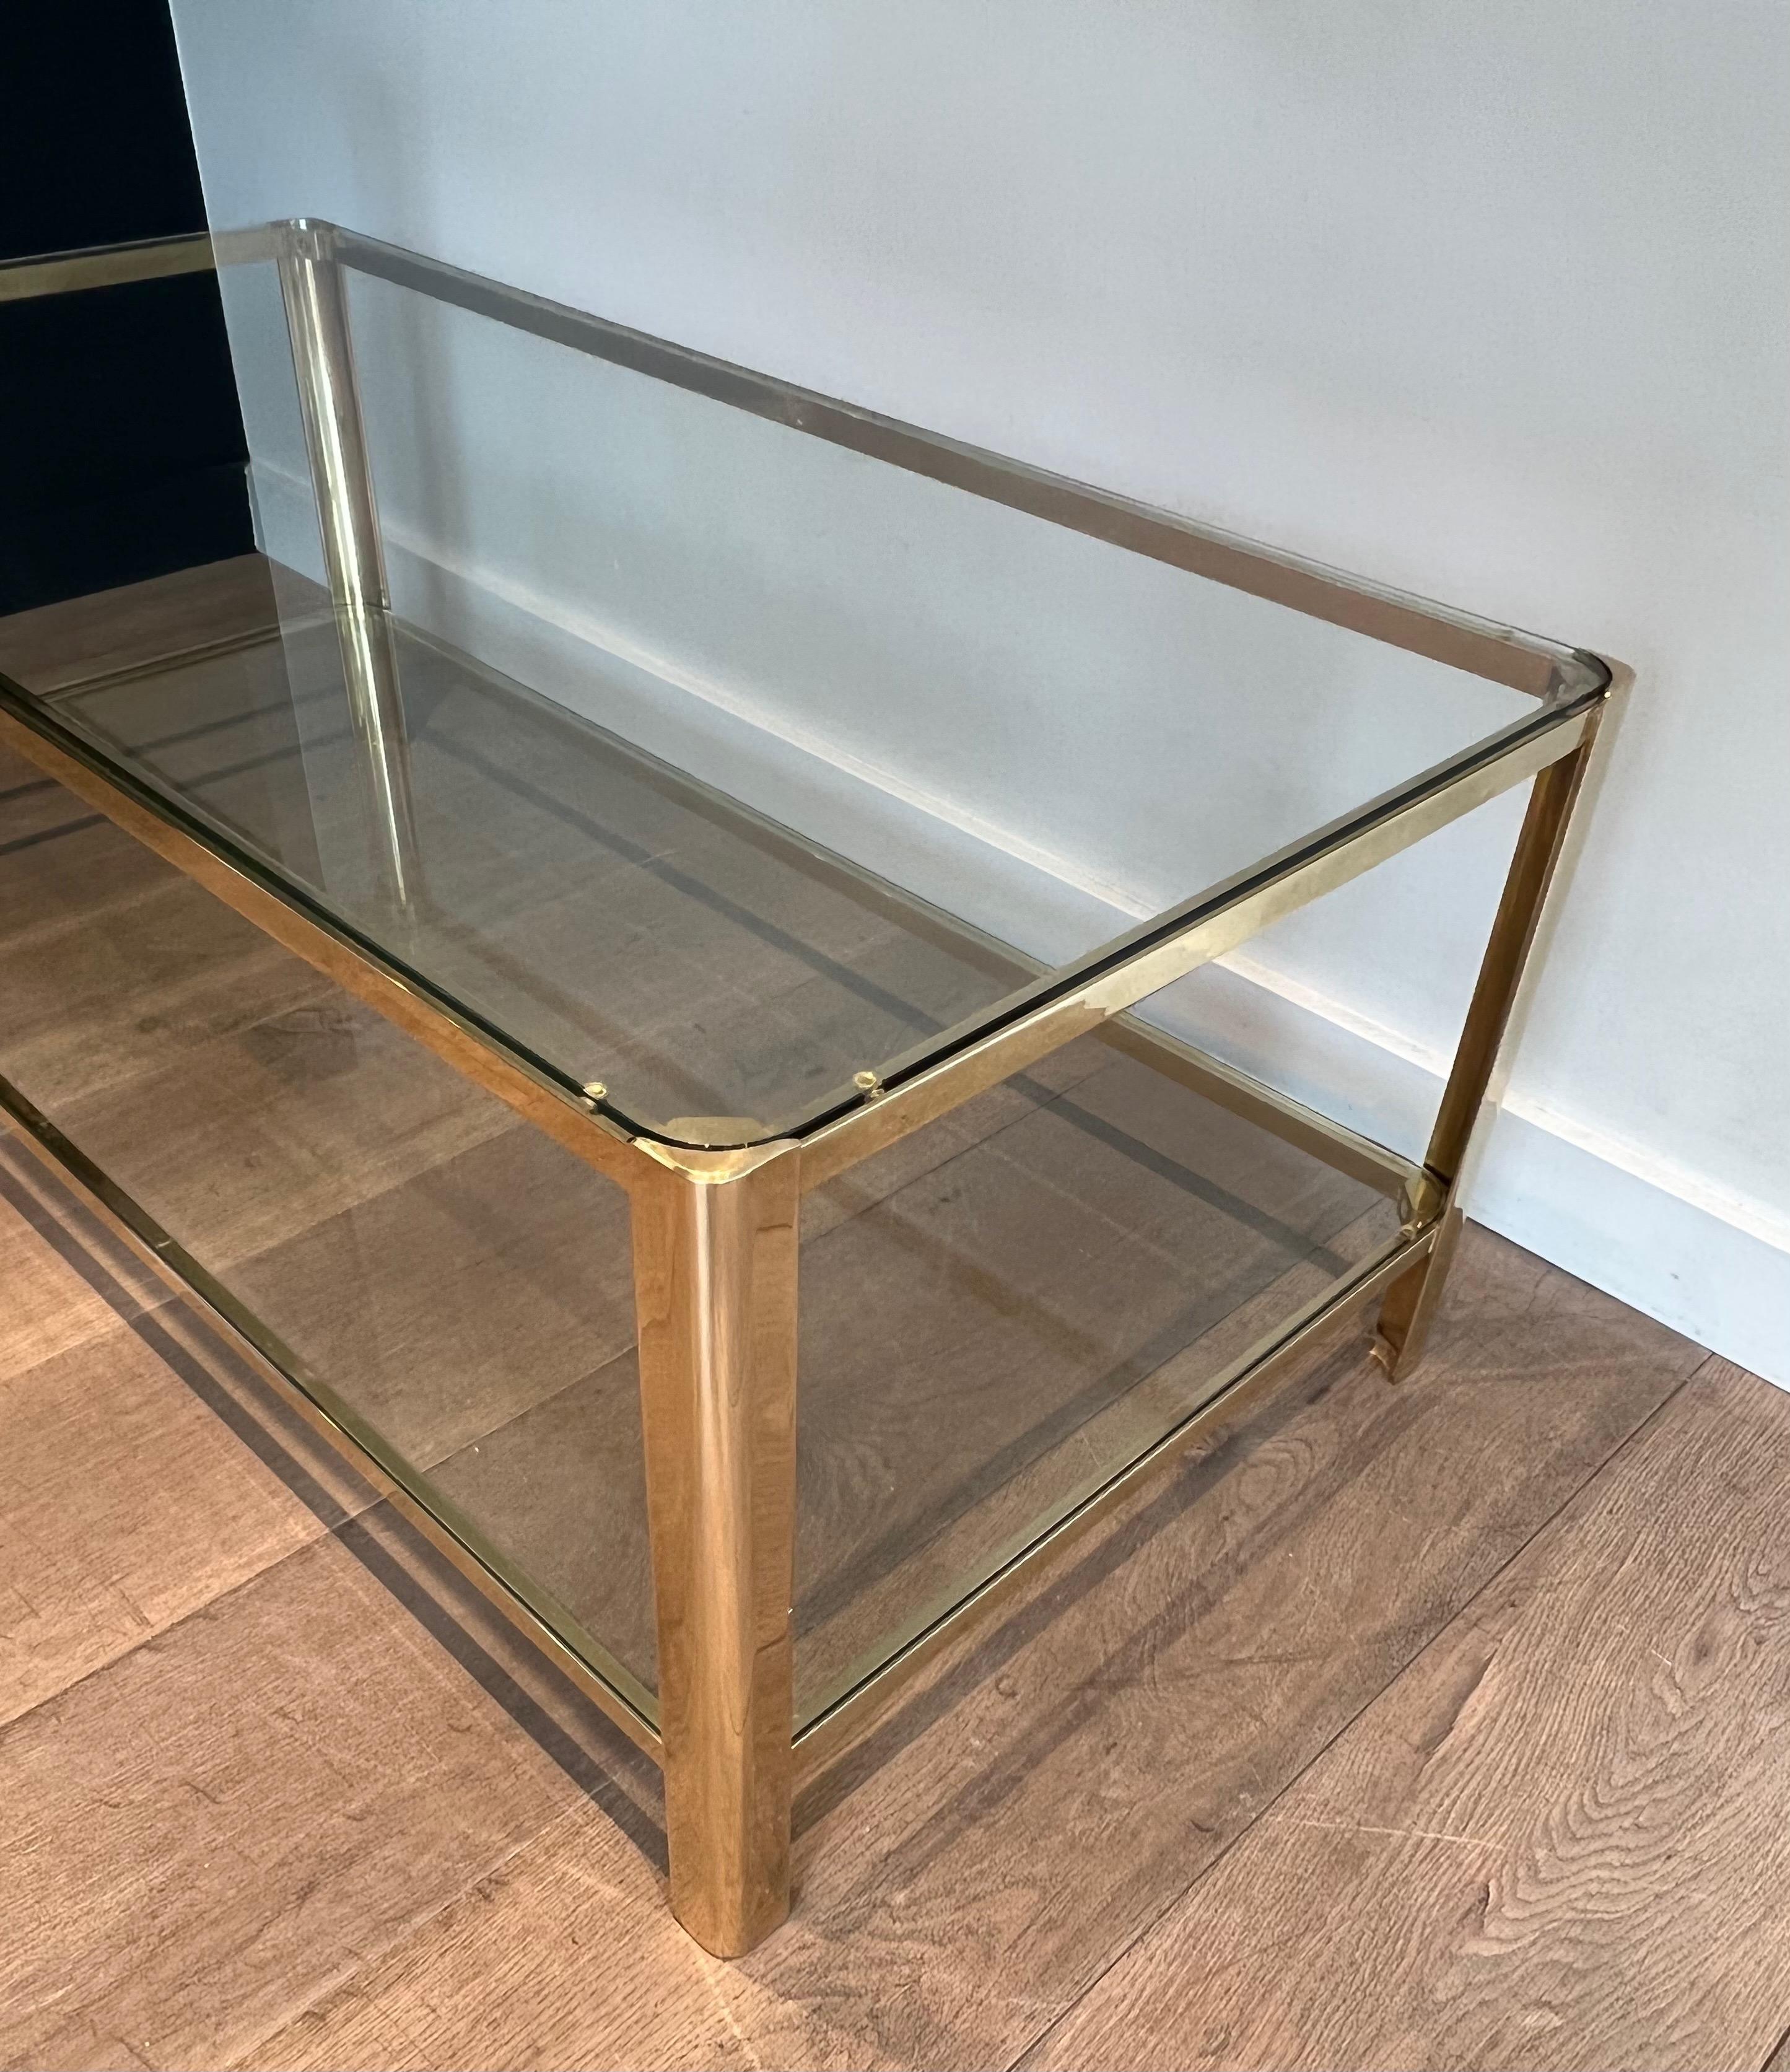 Bronze and Glass Two Tiers Coffee Table Signed Lepelletier and Stamped by Broncz For Sale 6